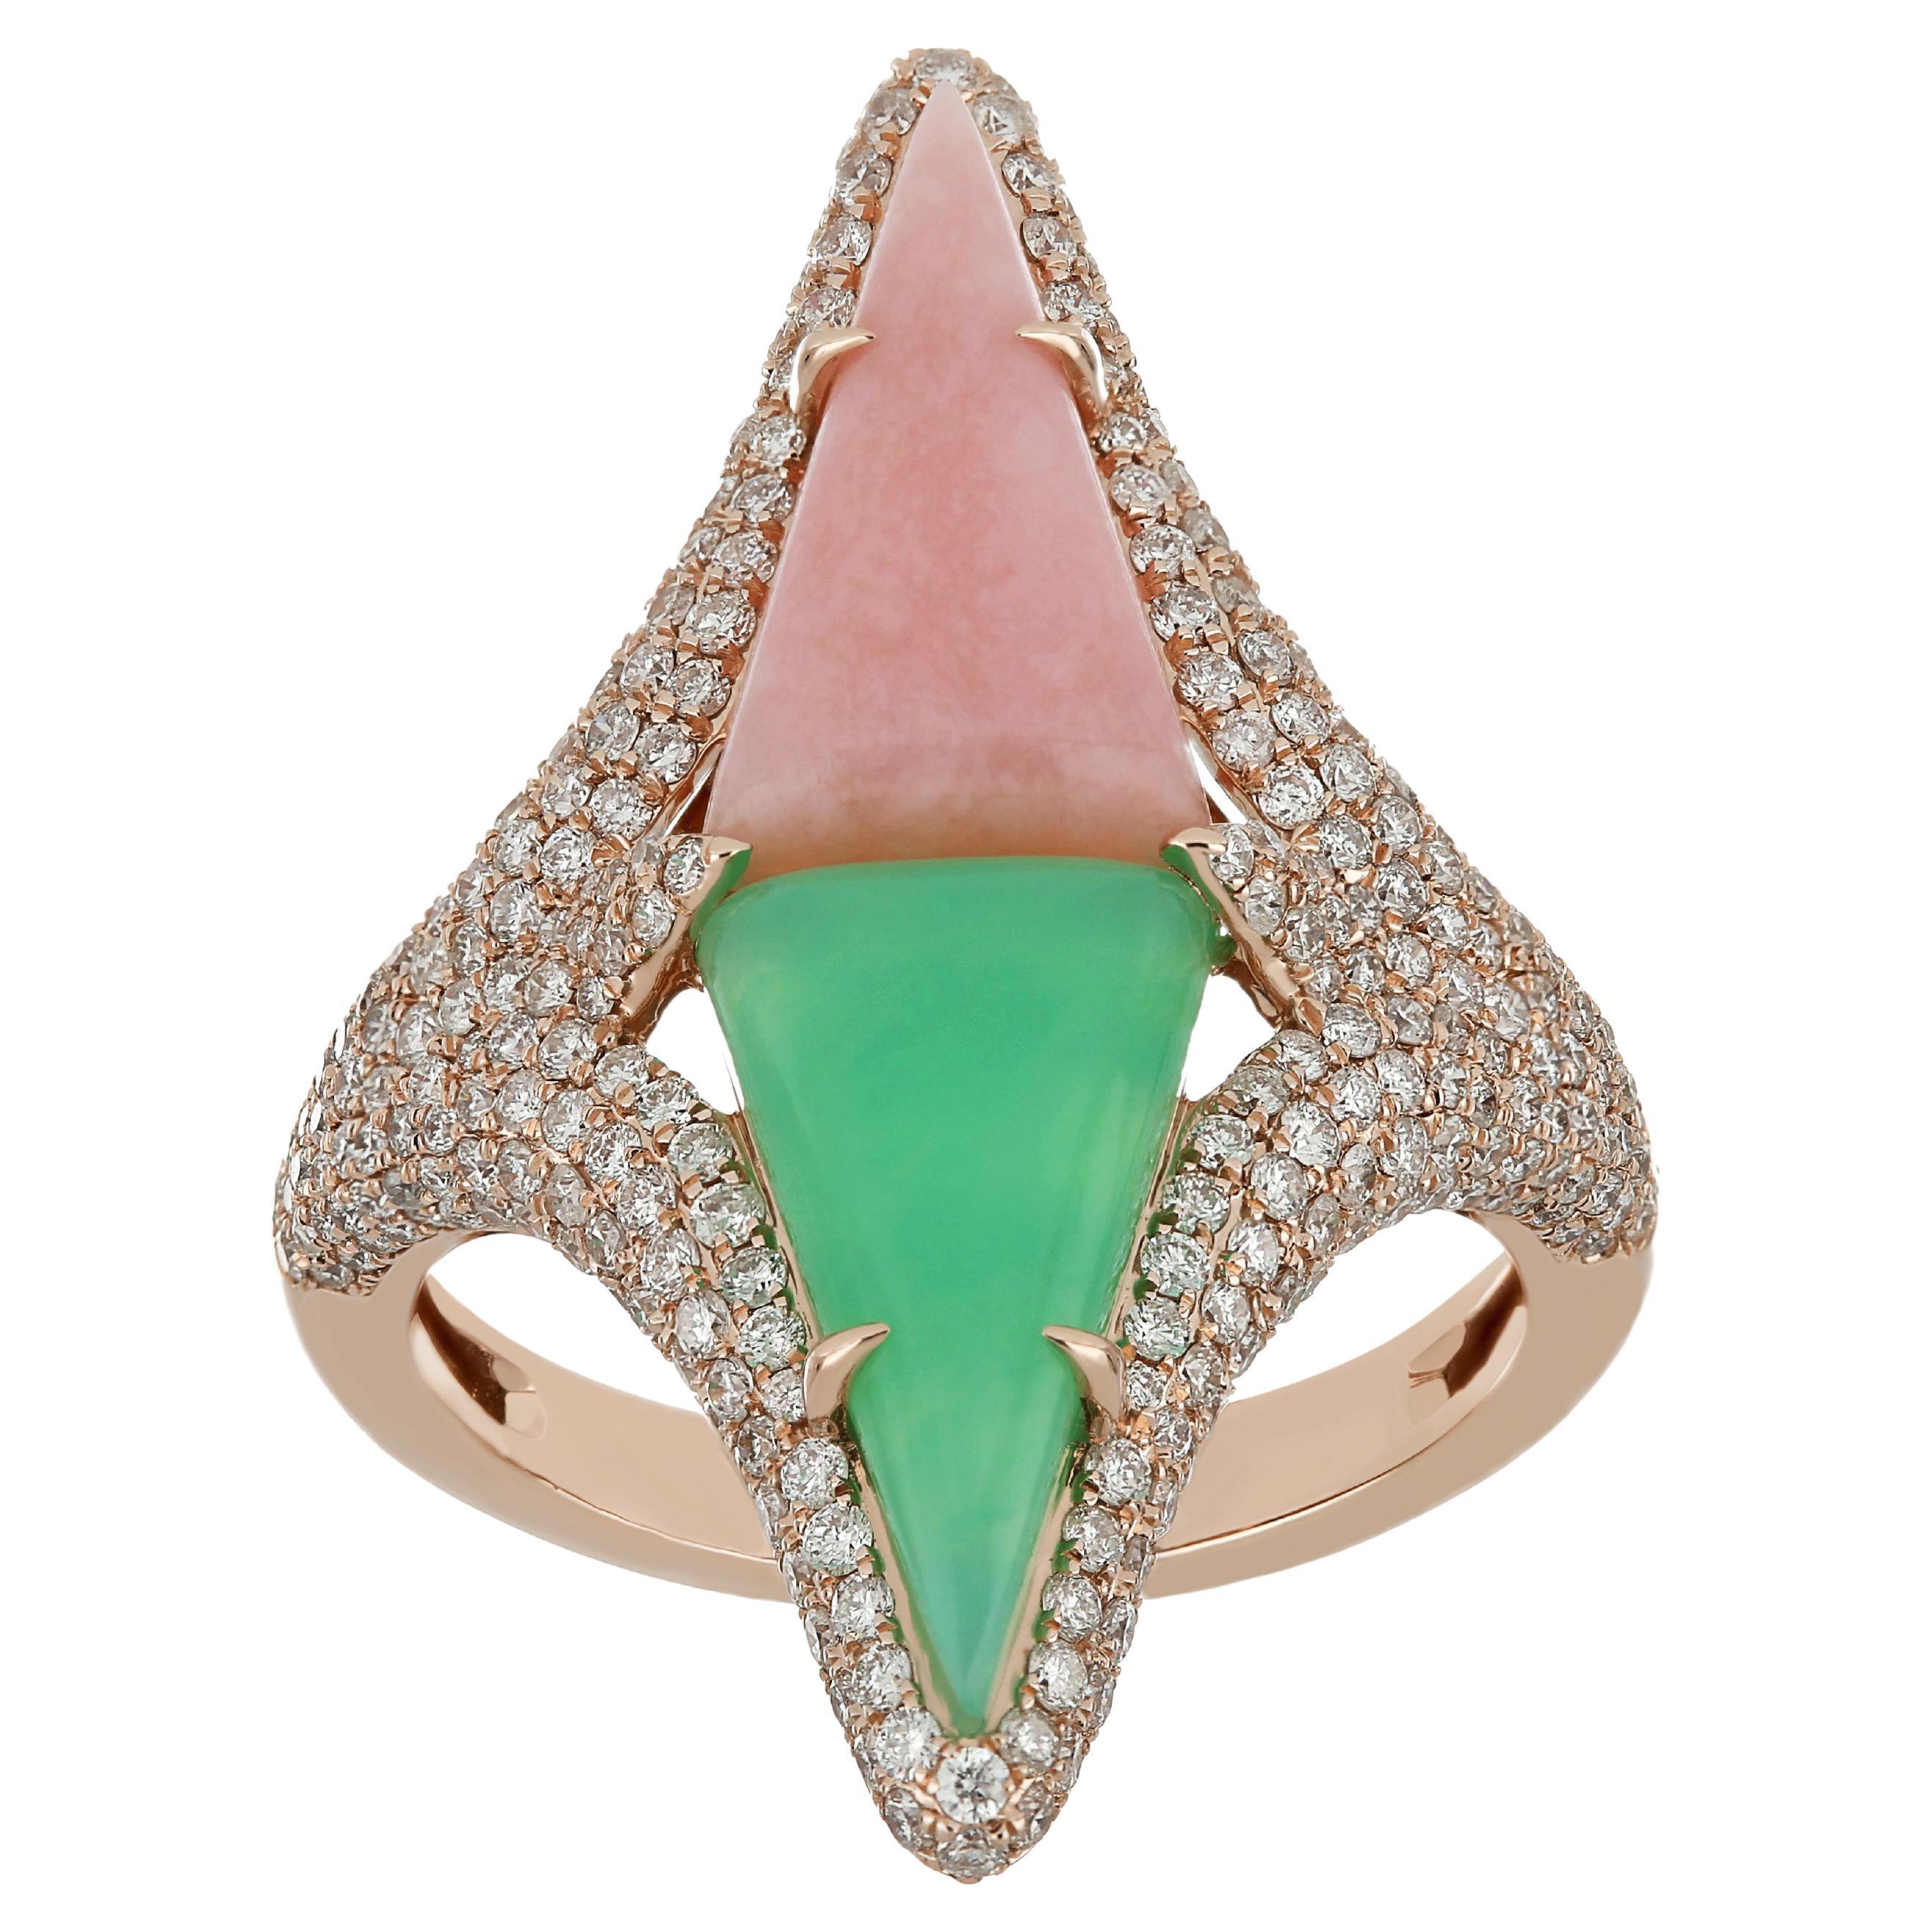 For Sale:  Pink Onyx, Chrysophrase and Diamond Studded Ring in 14 Karat Rose Gold